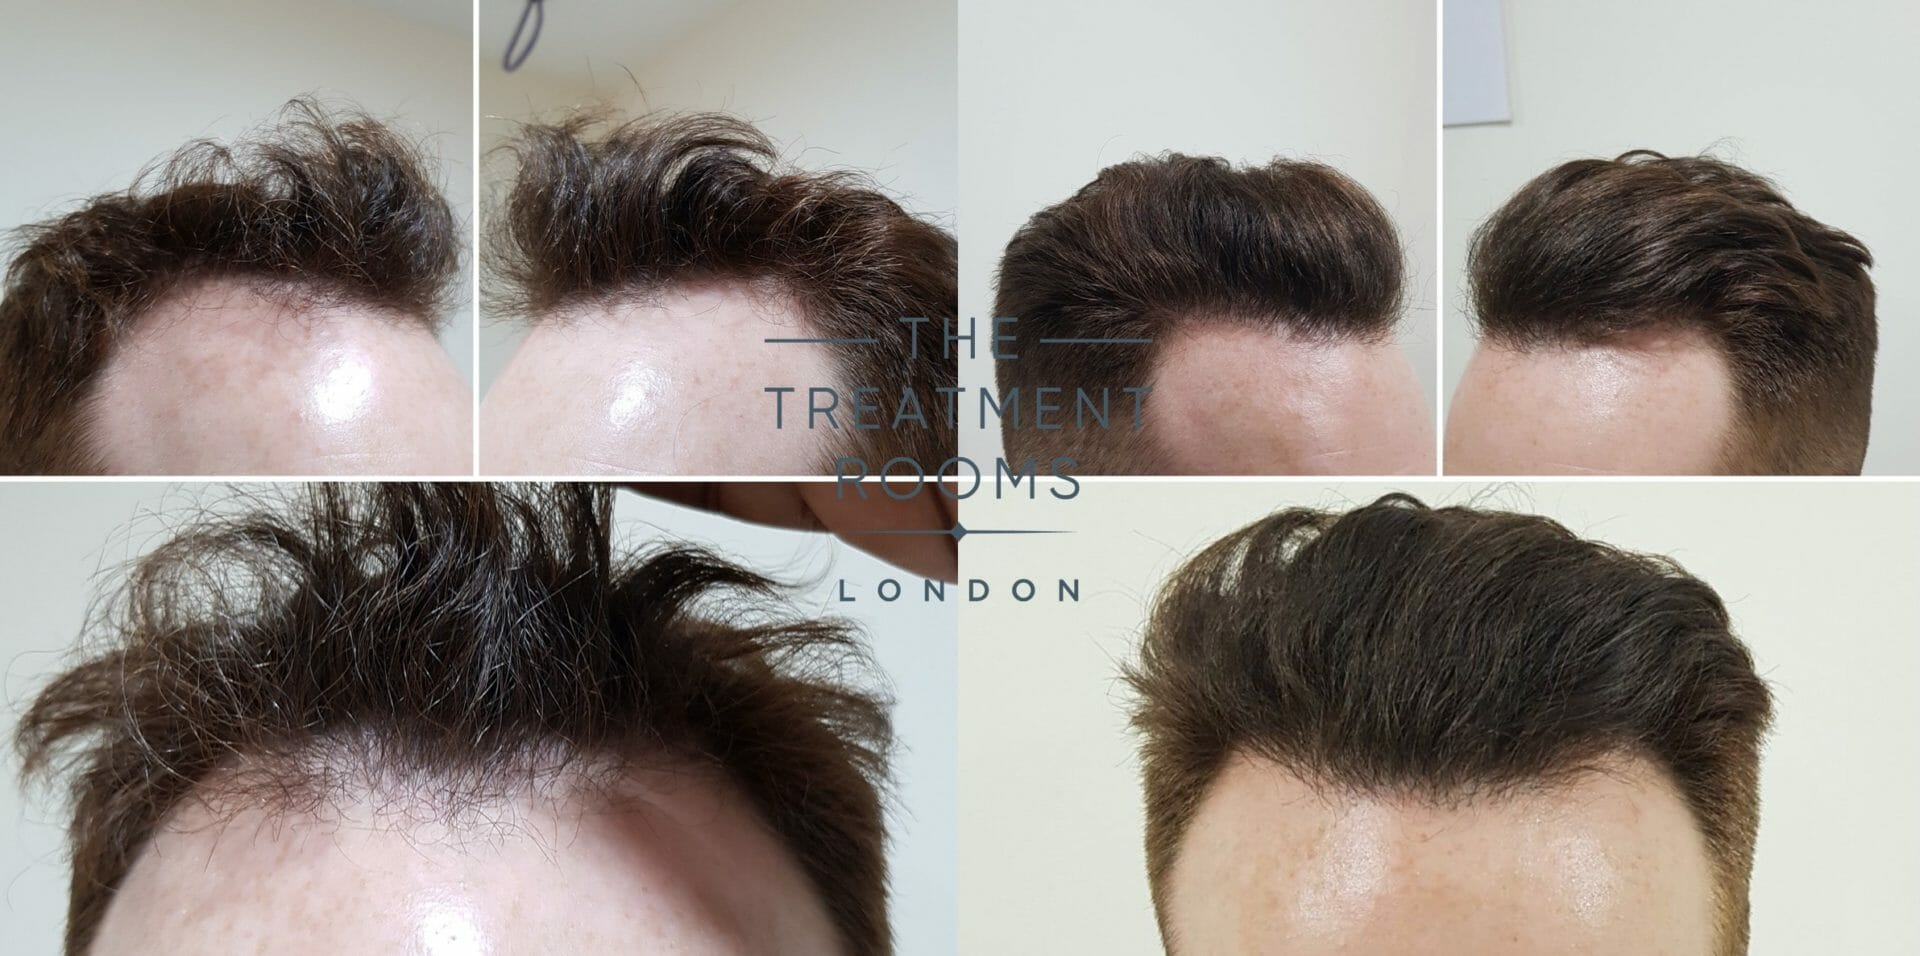 Before and after FUE hair transplant patient result